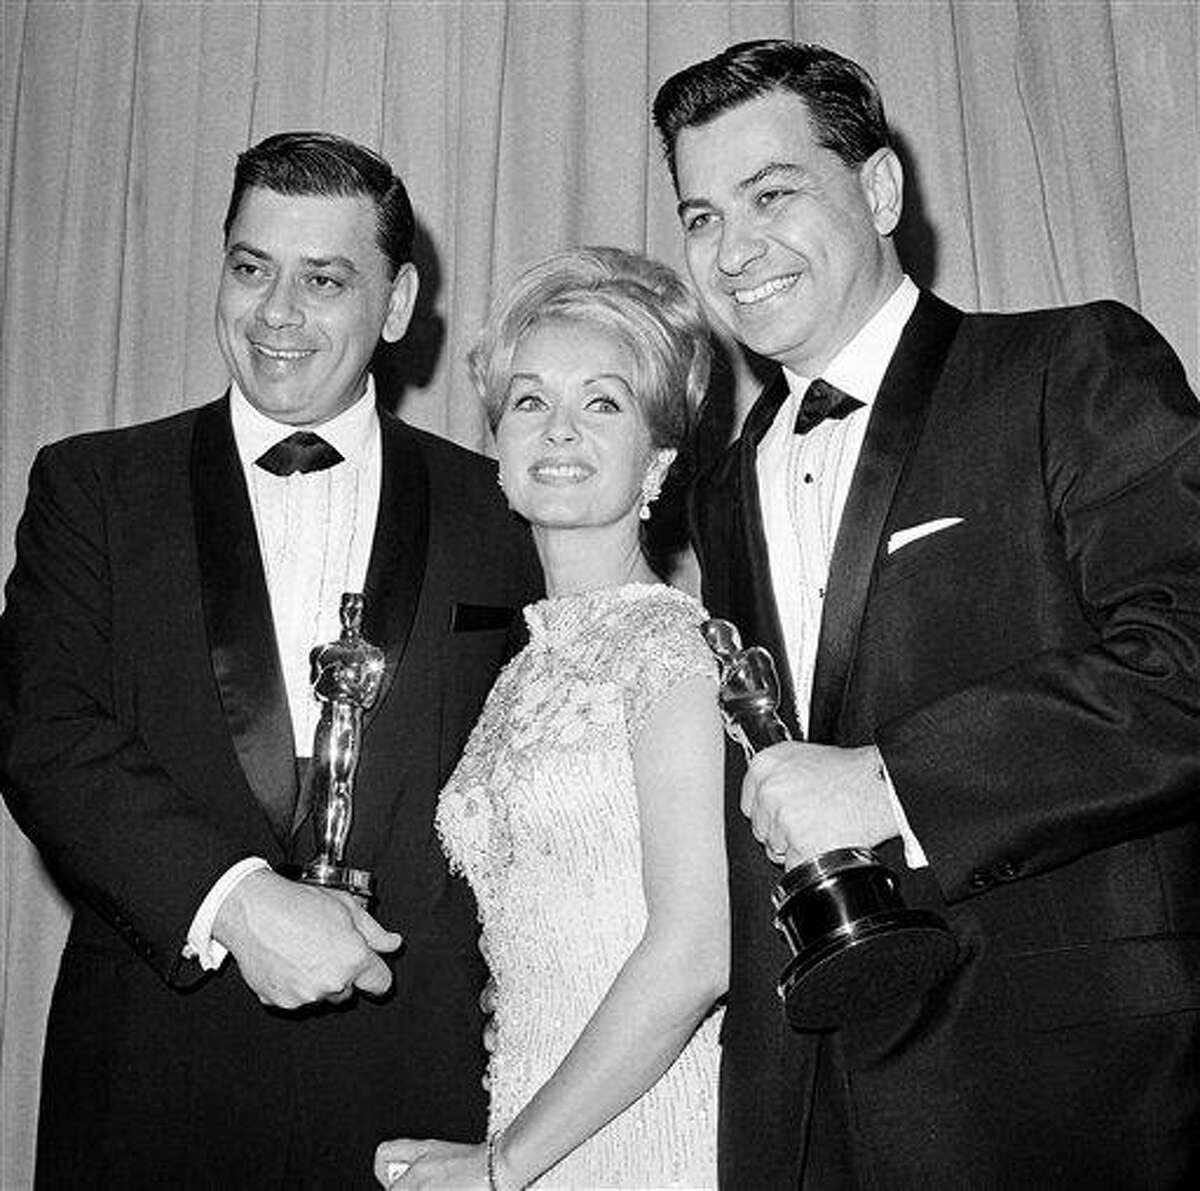 In this 1965 file photo, actress Debbie Reynolds poses with Academy Awards winners for best music Richard M. Sherman, right, and Robert Sherman, left, who received the award for "Mary Poppins" in Santa Monica Calif. Songwriter Sherman, who wrote the tongue-twisting "Supercalifragilisticexpialidocious" and other enduring songs for Disney classics, has died. He was 86. Associated Press